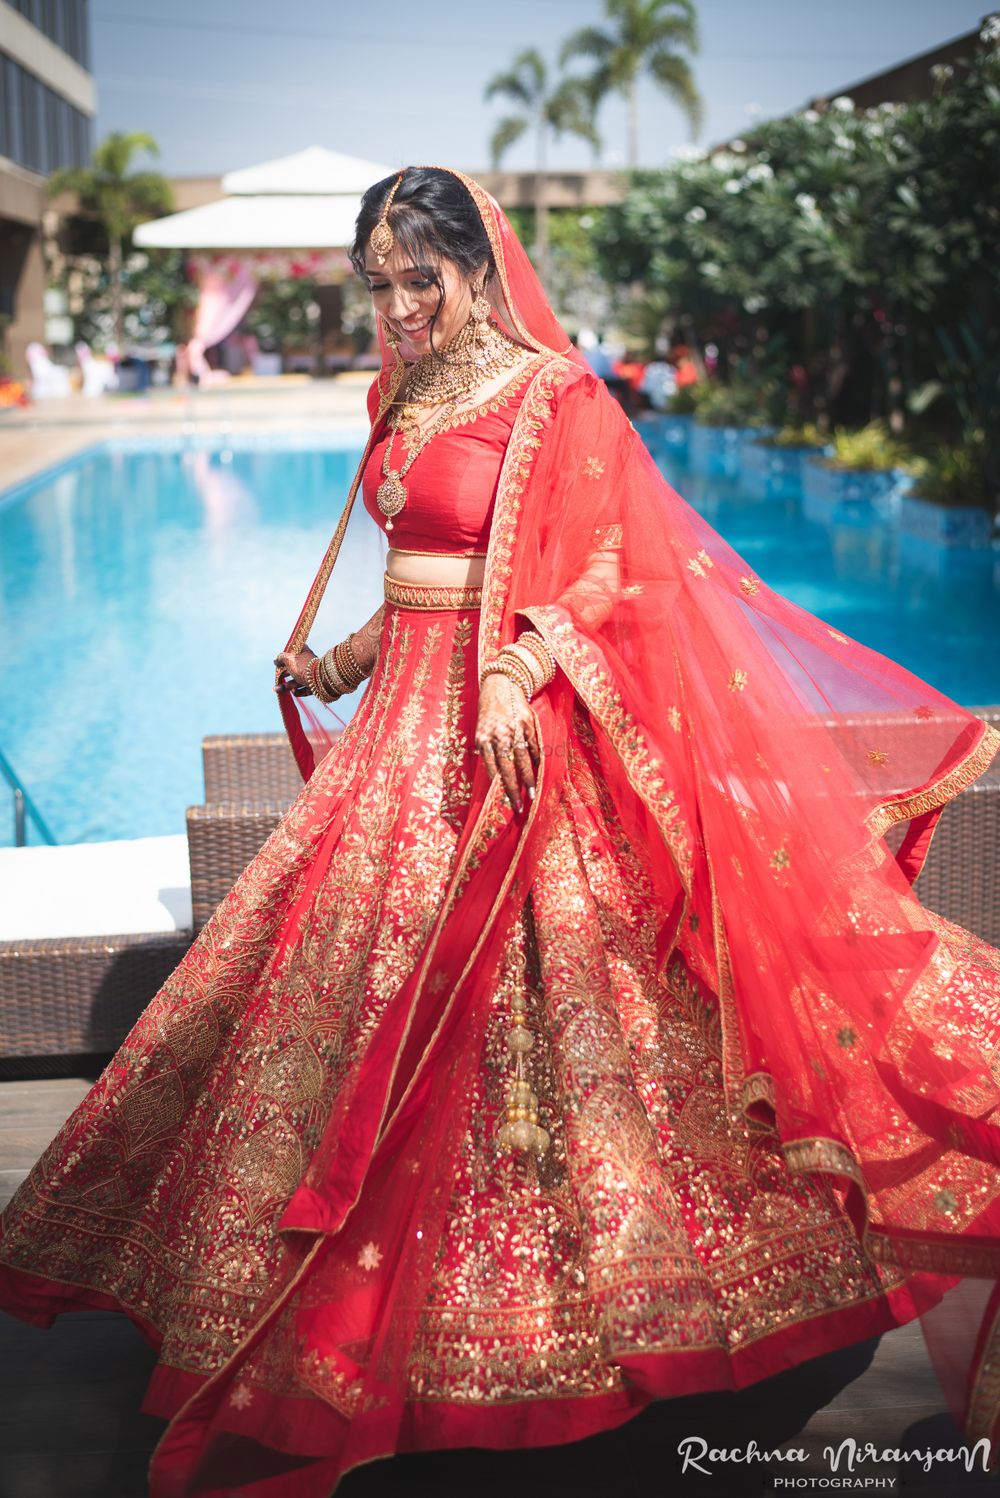 Photo of A bride in a red and gold lehenga with double dupatta, twirling on her wedding day